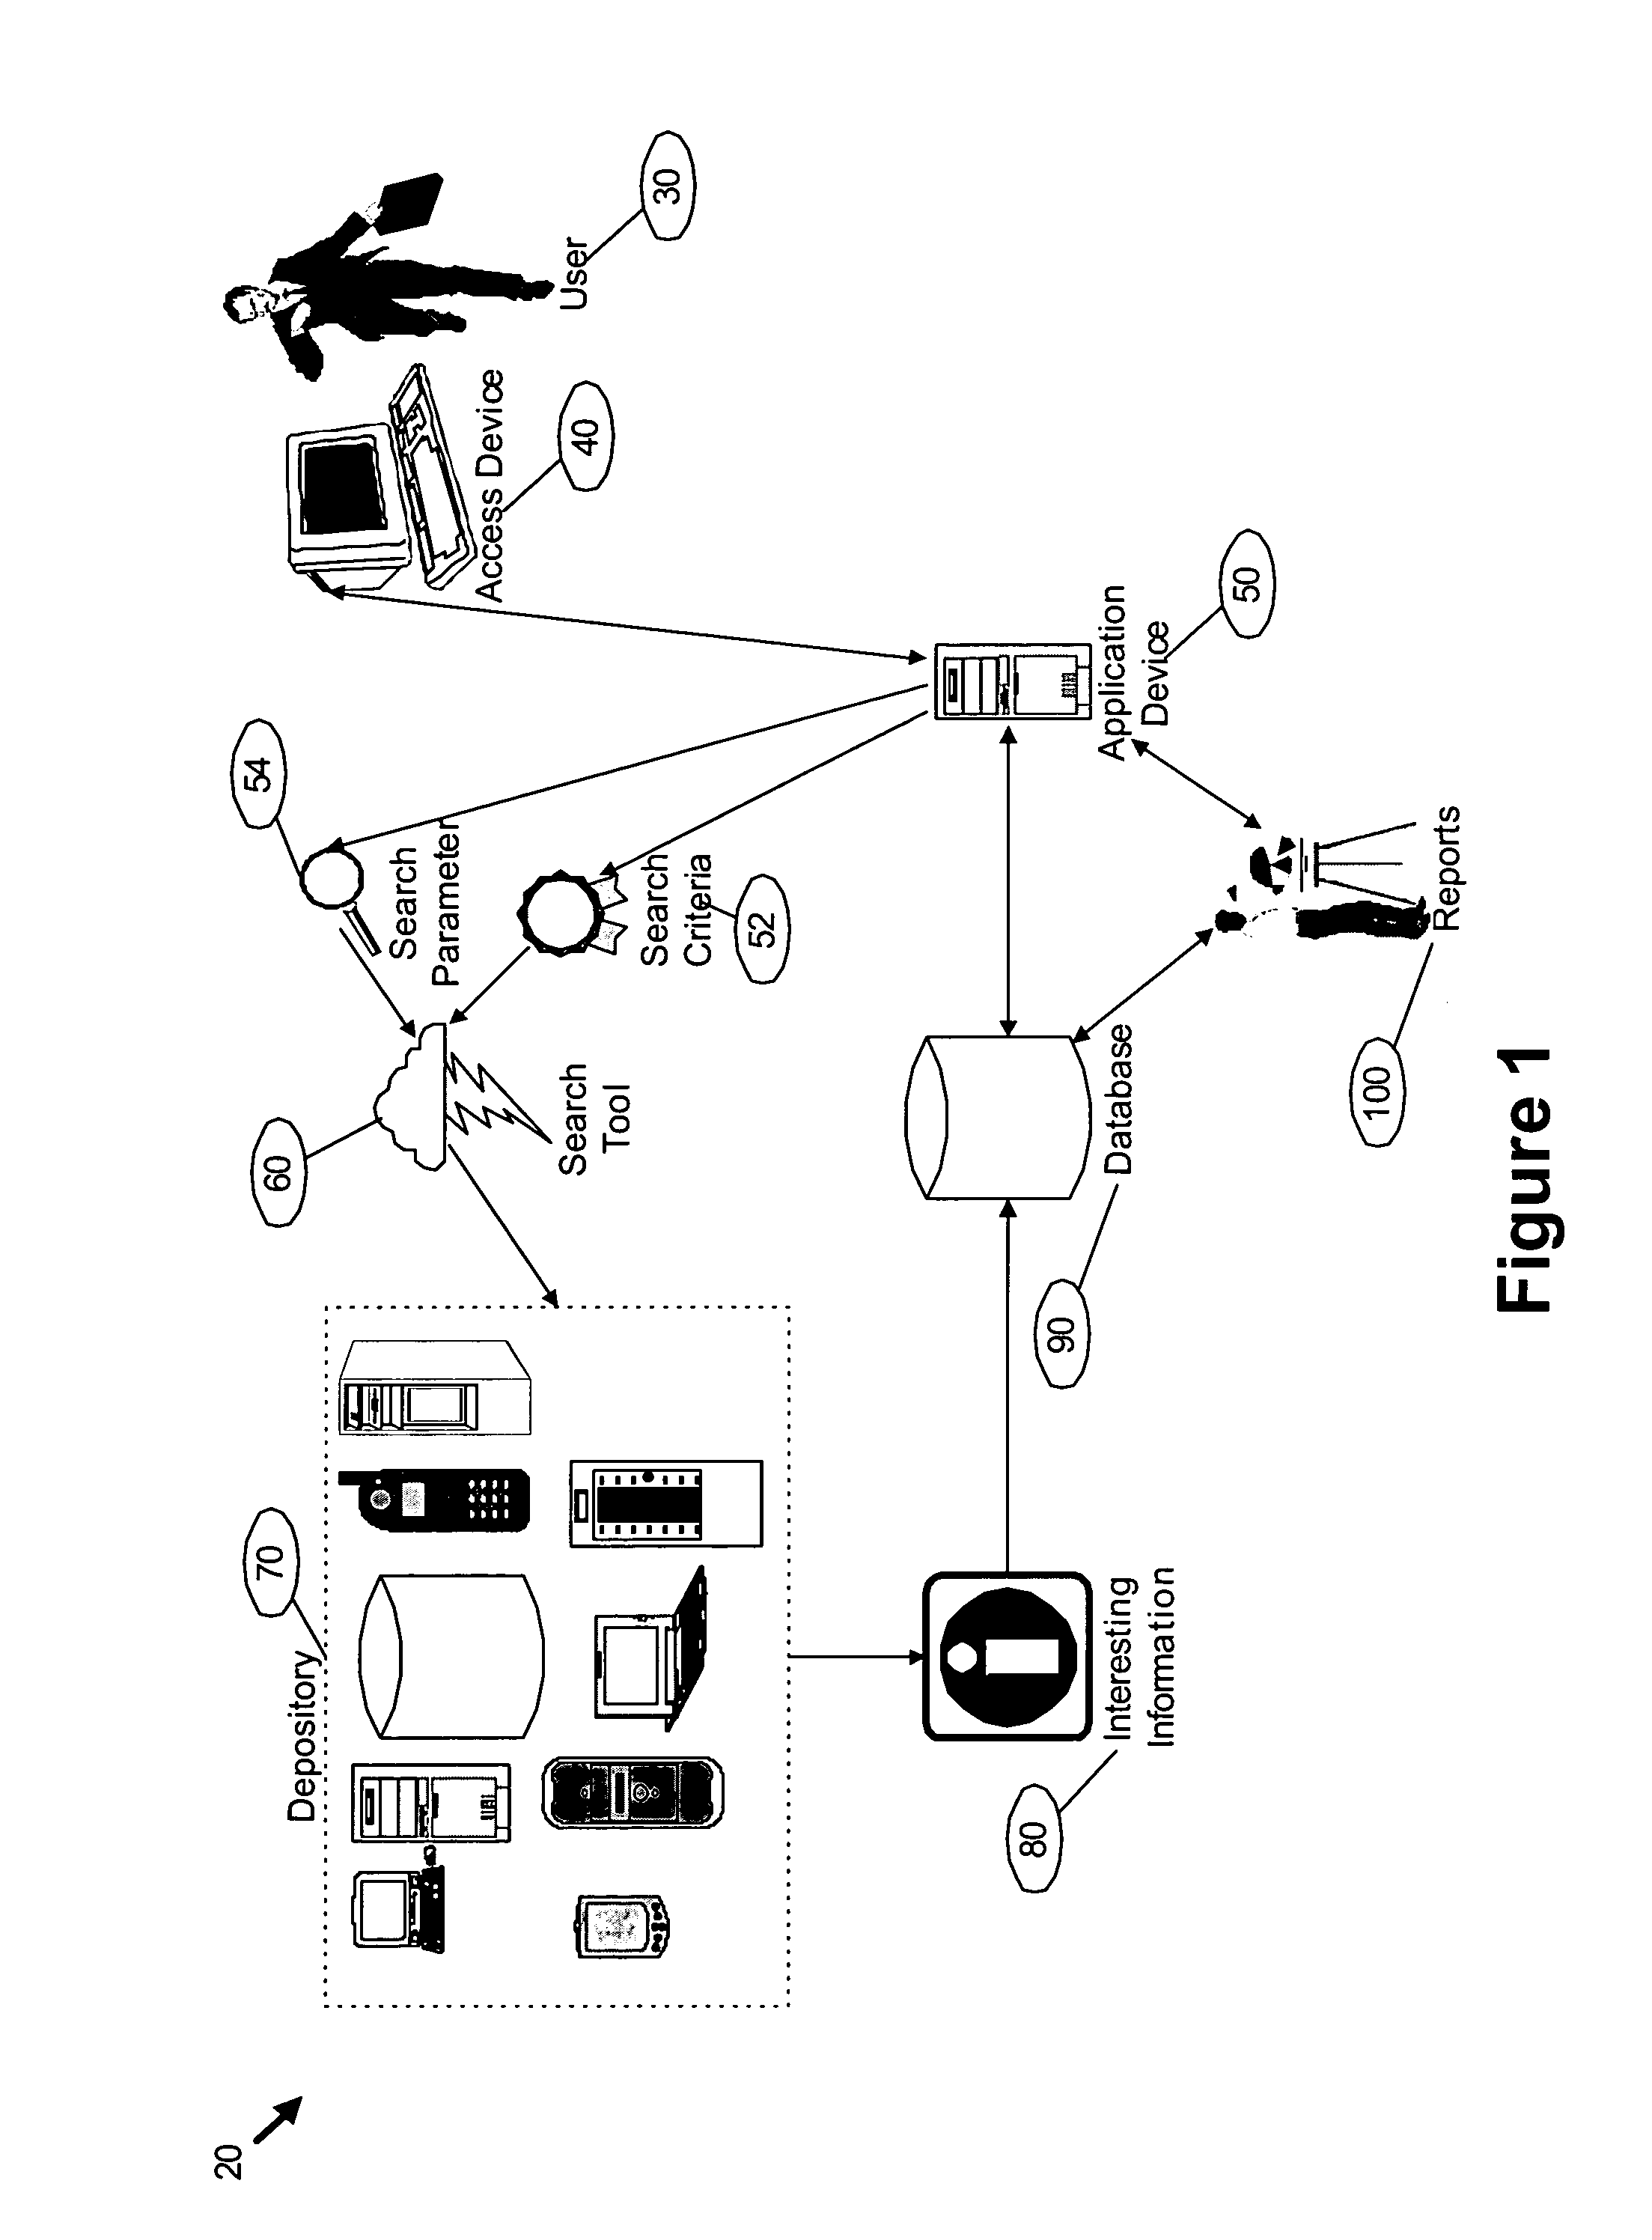 System or method for gathering and utilizing information